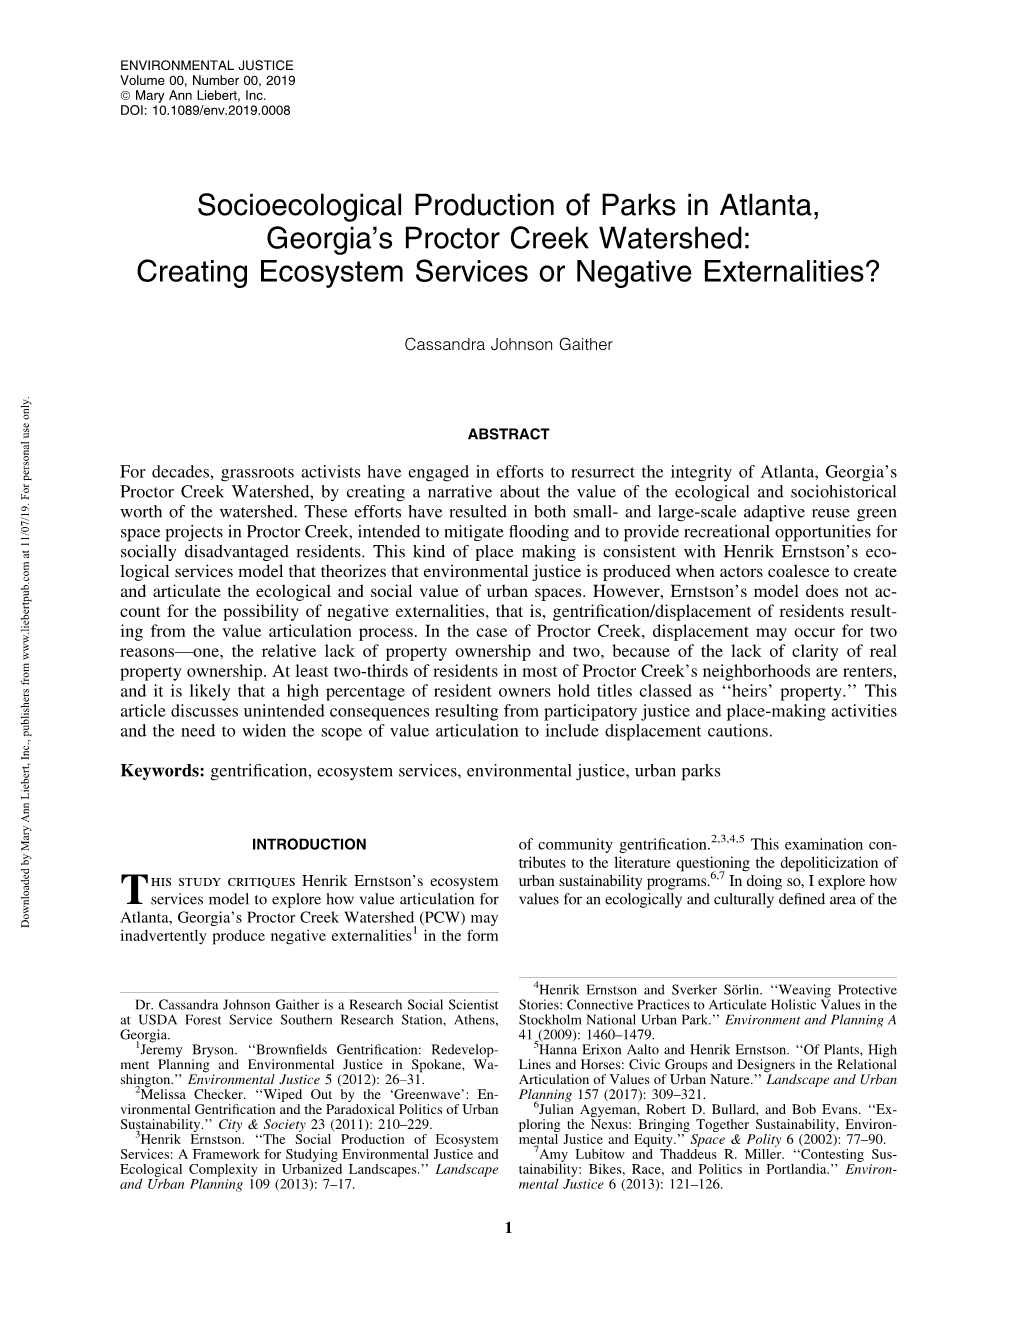 Socioecological Production of Parks in Atlanta, Georgia's Proctor Creek Watershed